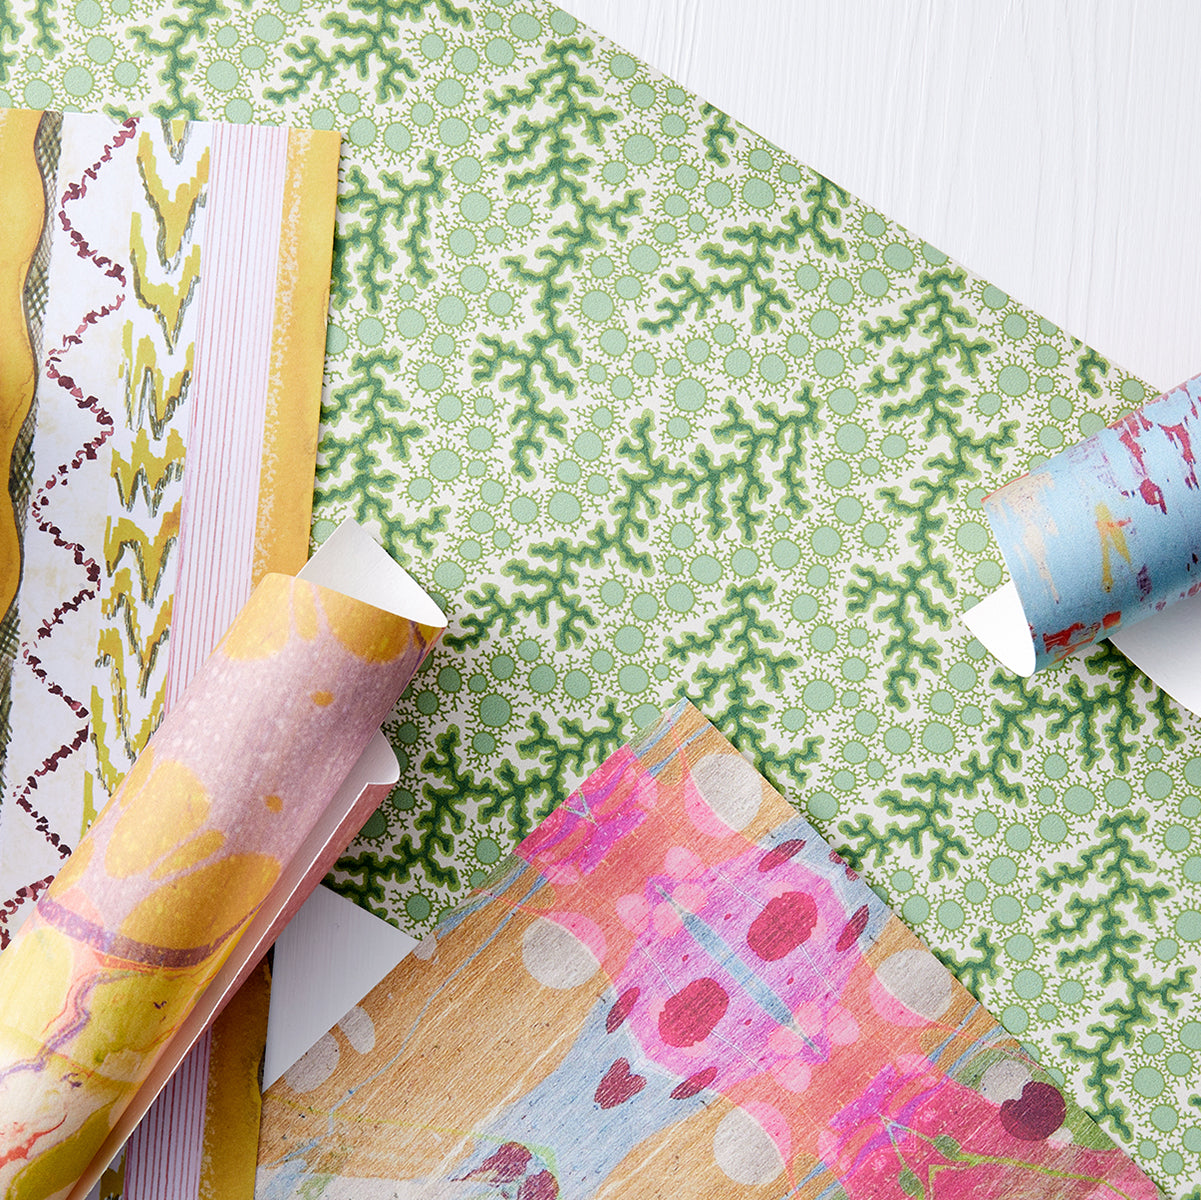 Send Your Own Paper Tissue Boxes